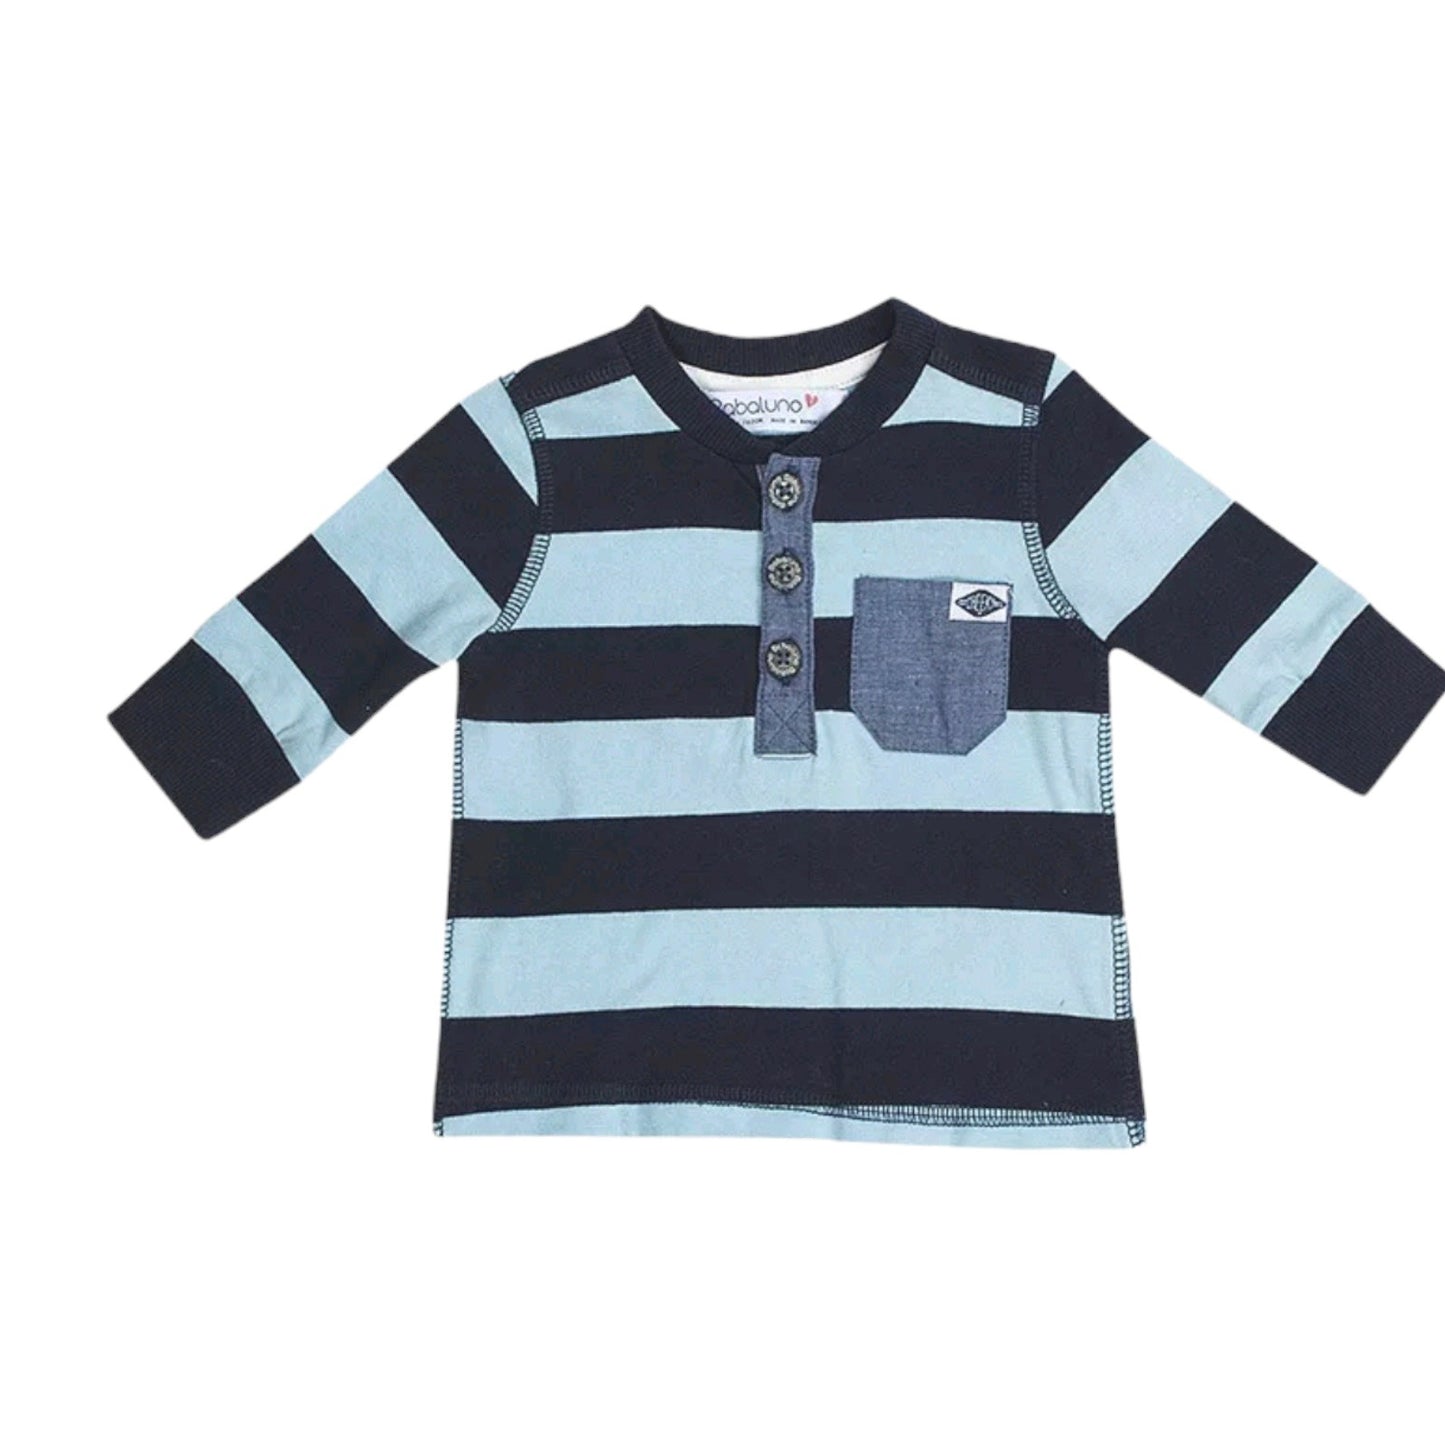 Striped Long Sleeve Rugby Style Tops